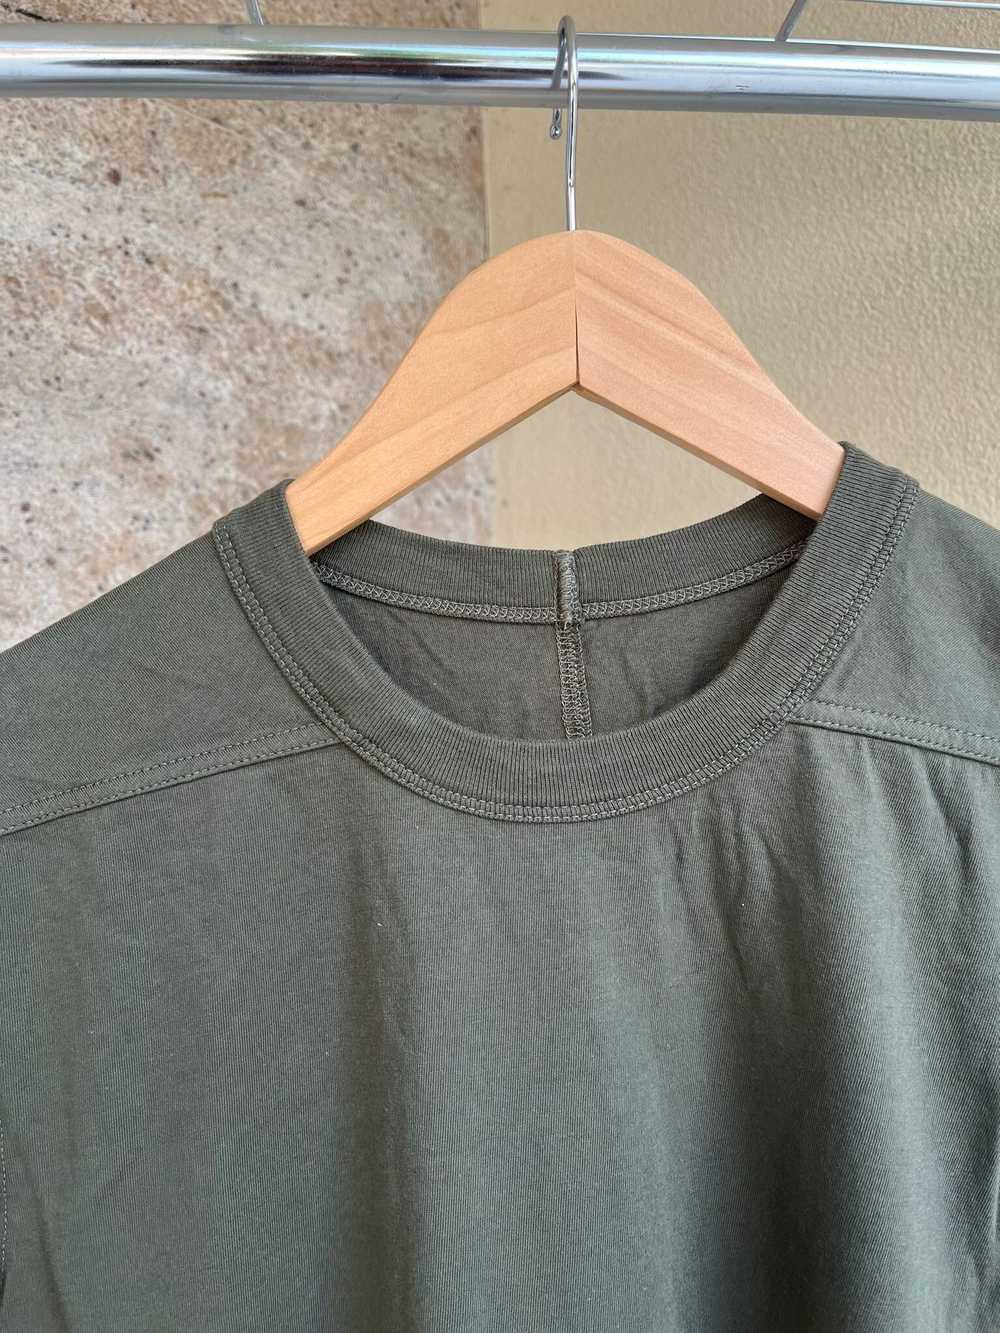 Rick Owens Mainline Level T-Shirt in Green - image 6